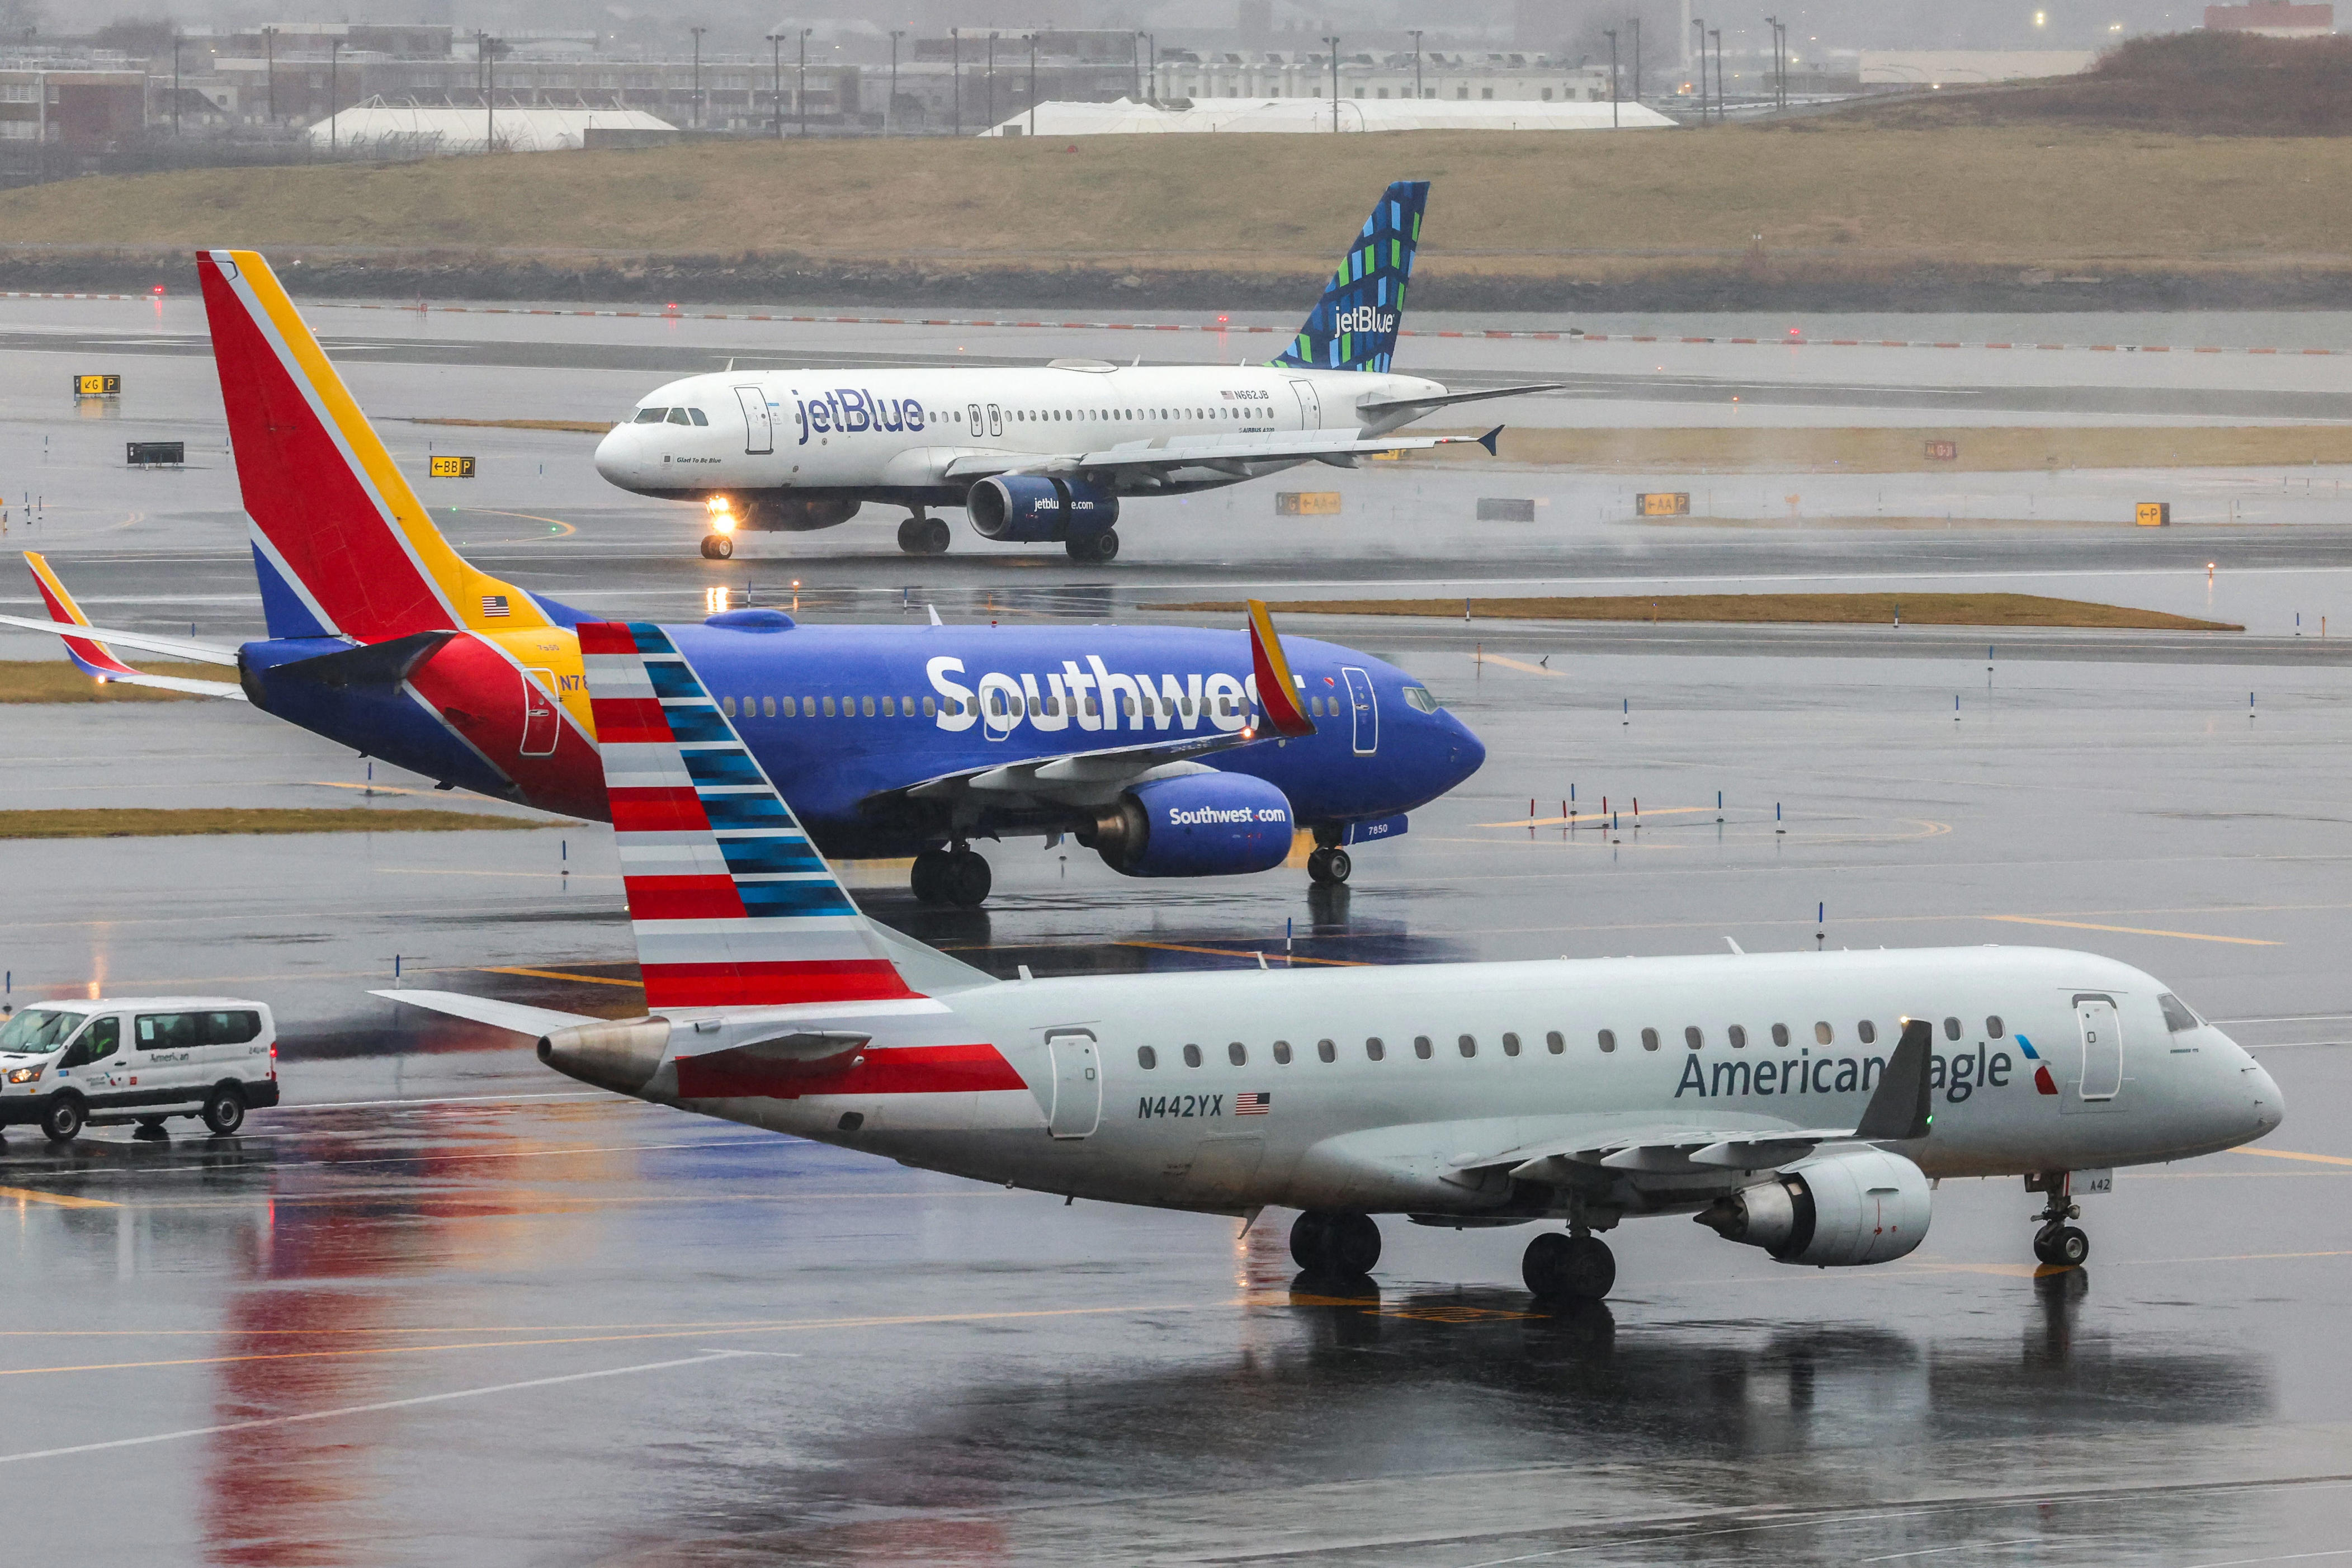 jetblue, southwest planes nearly collide – experts warn of air traffic control fatigue